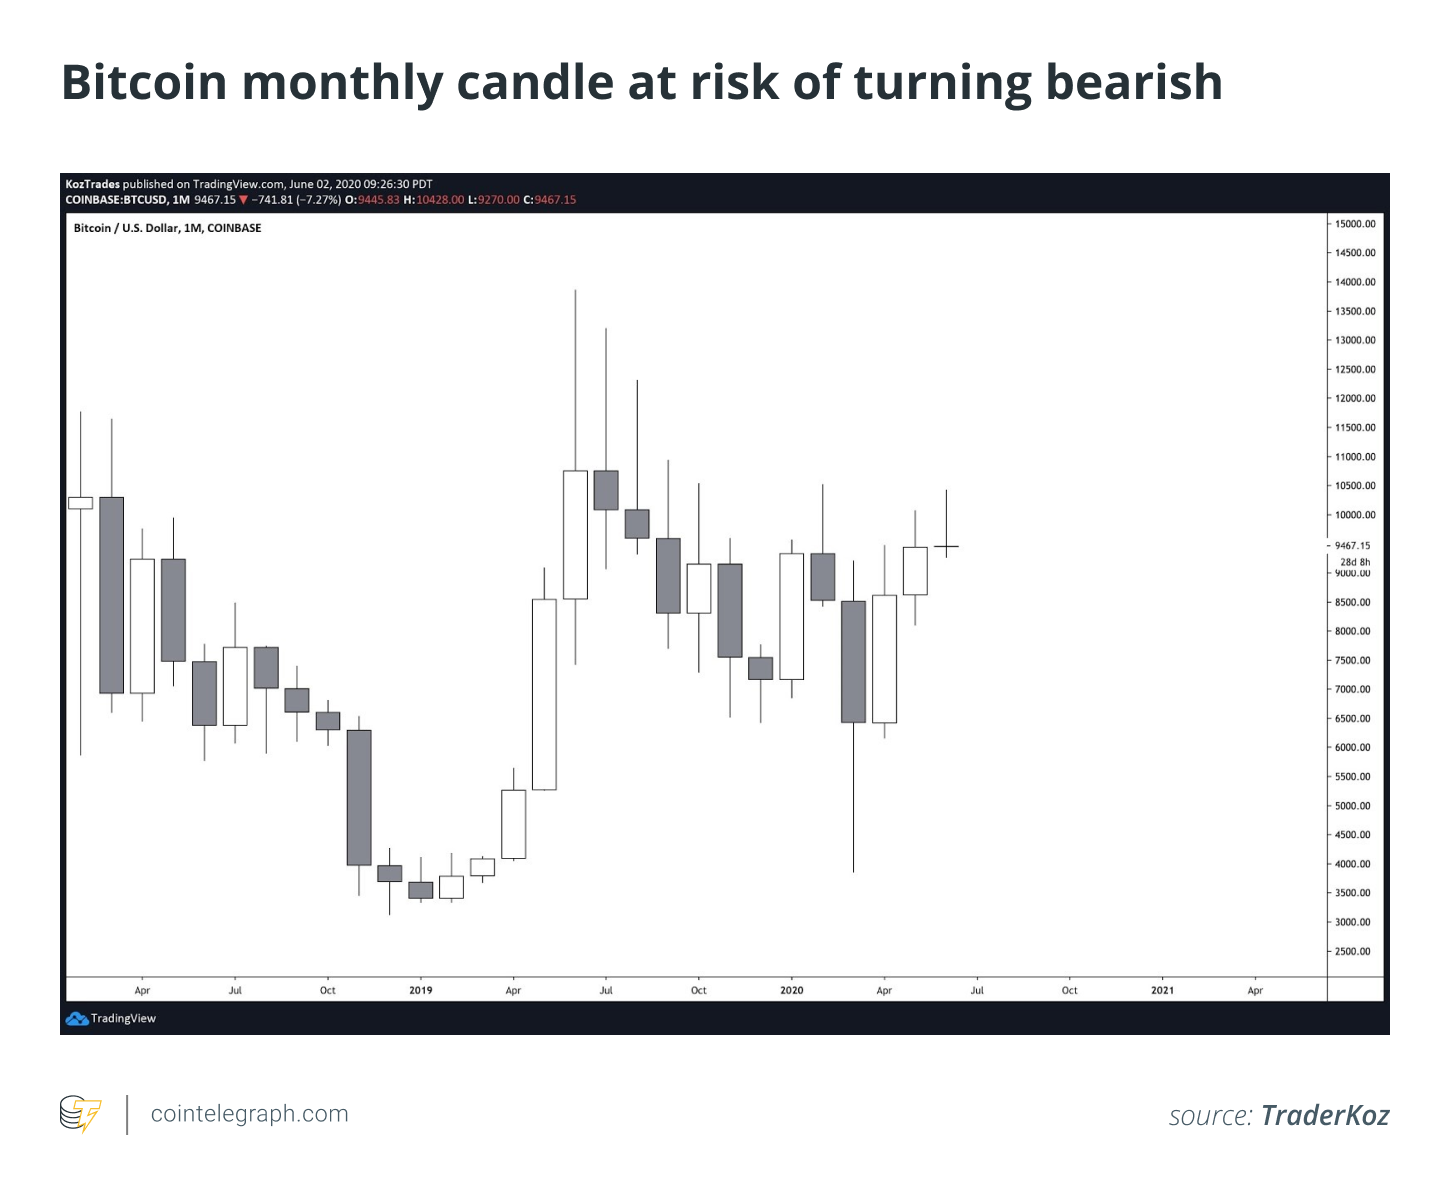 Bitcoin monthly candle at risk of turning bearish